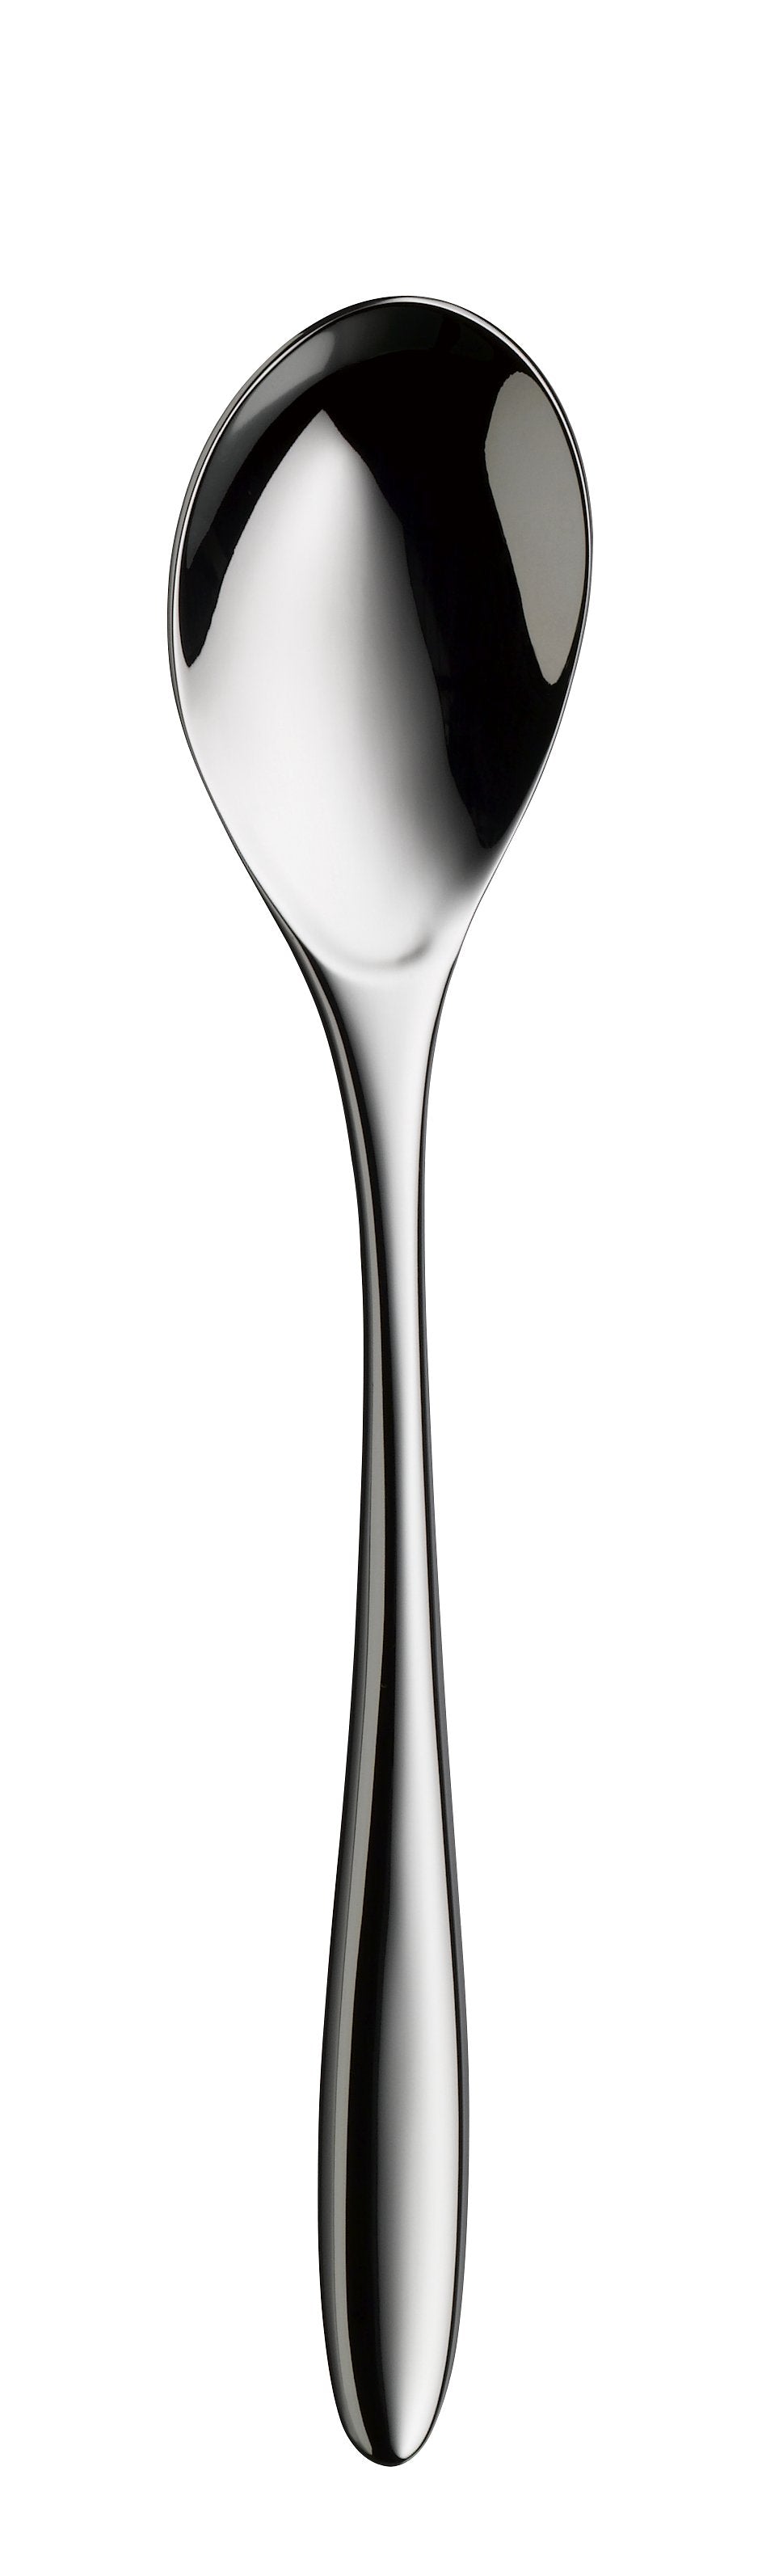 Table spoon AVES silver plated 218mm